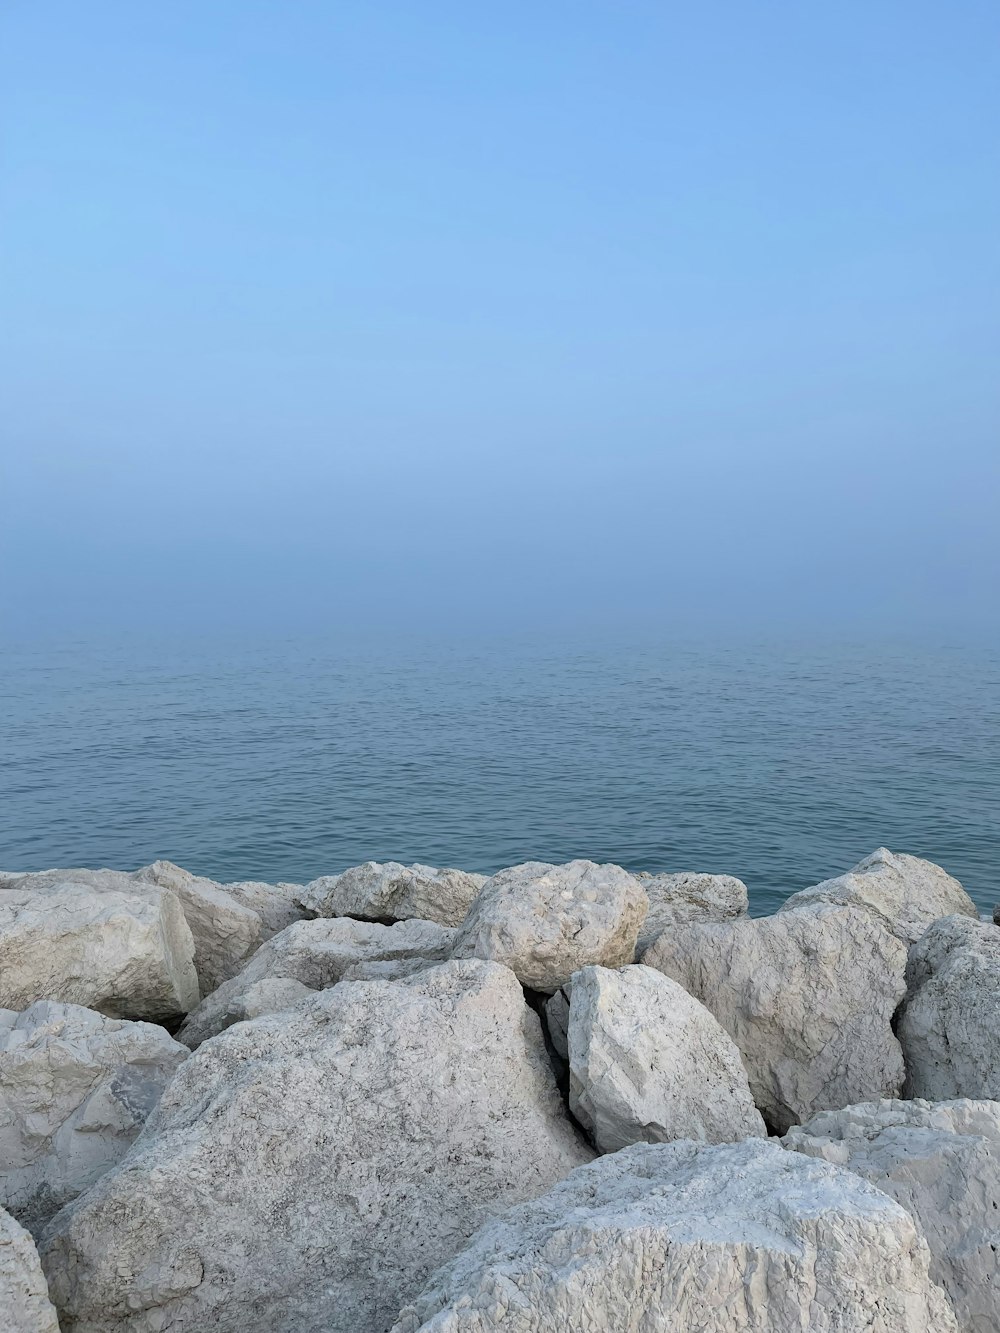 a view of a body of water from a rocky shore